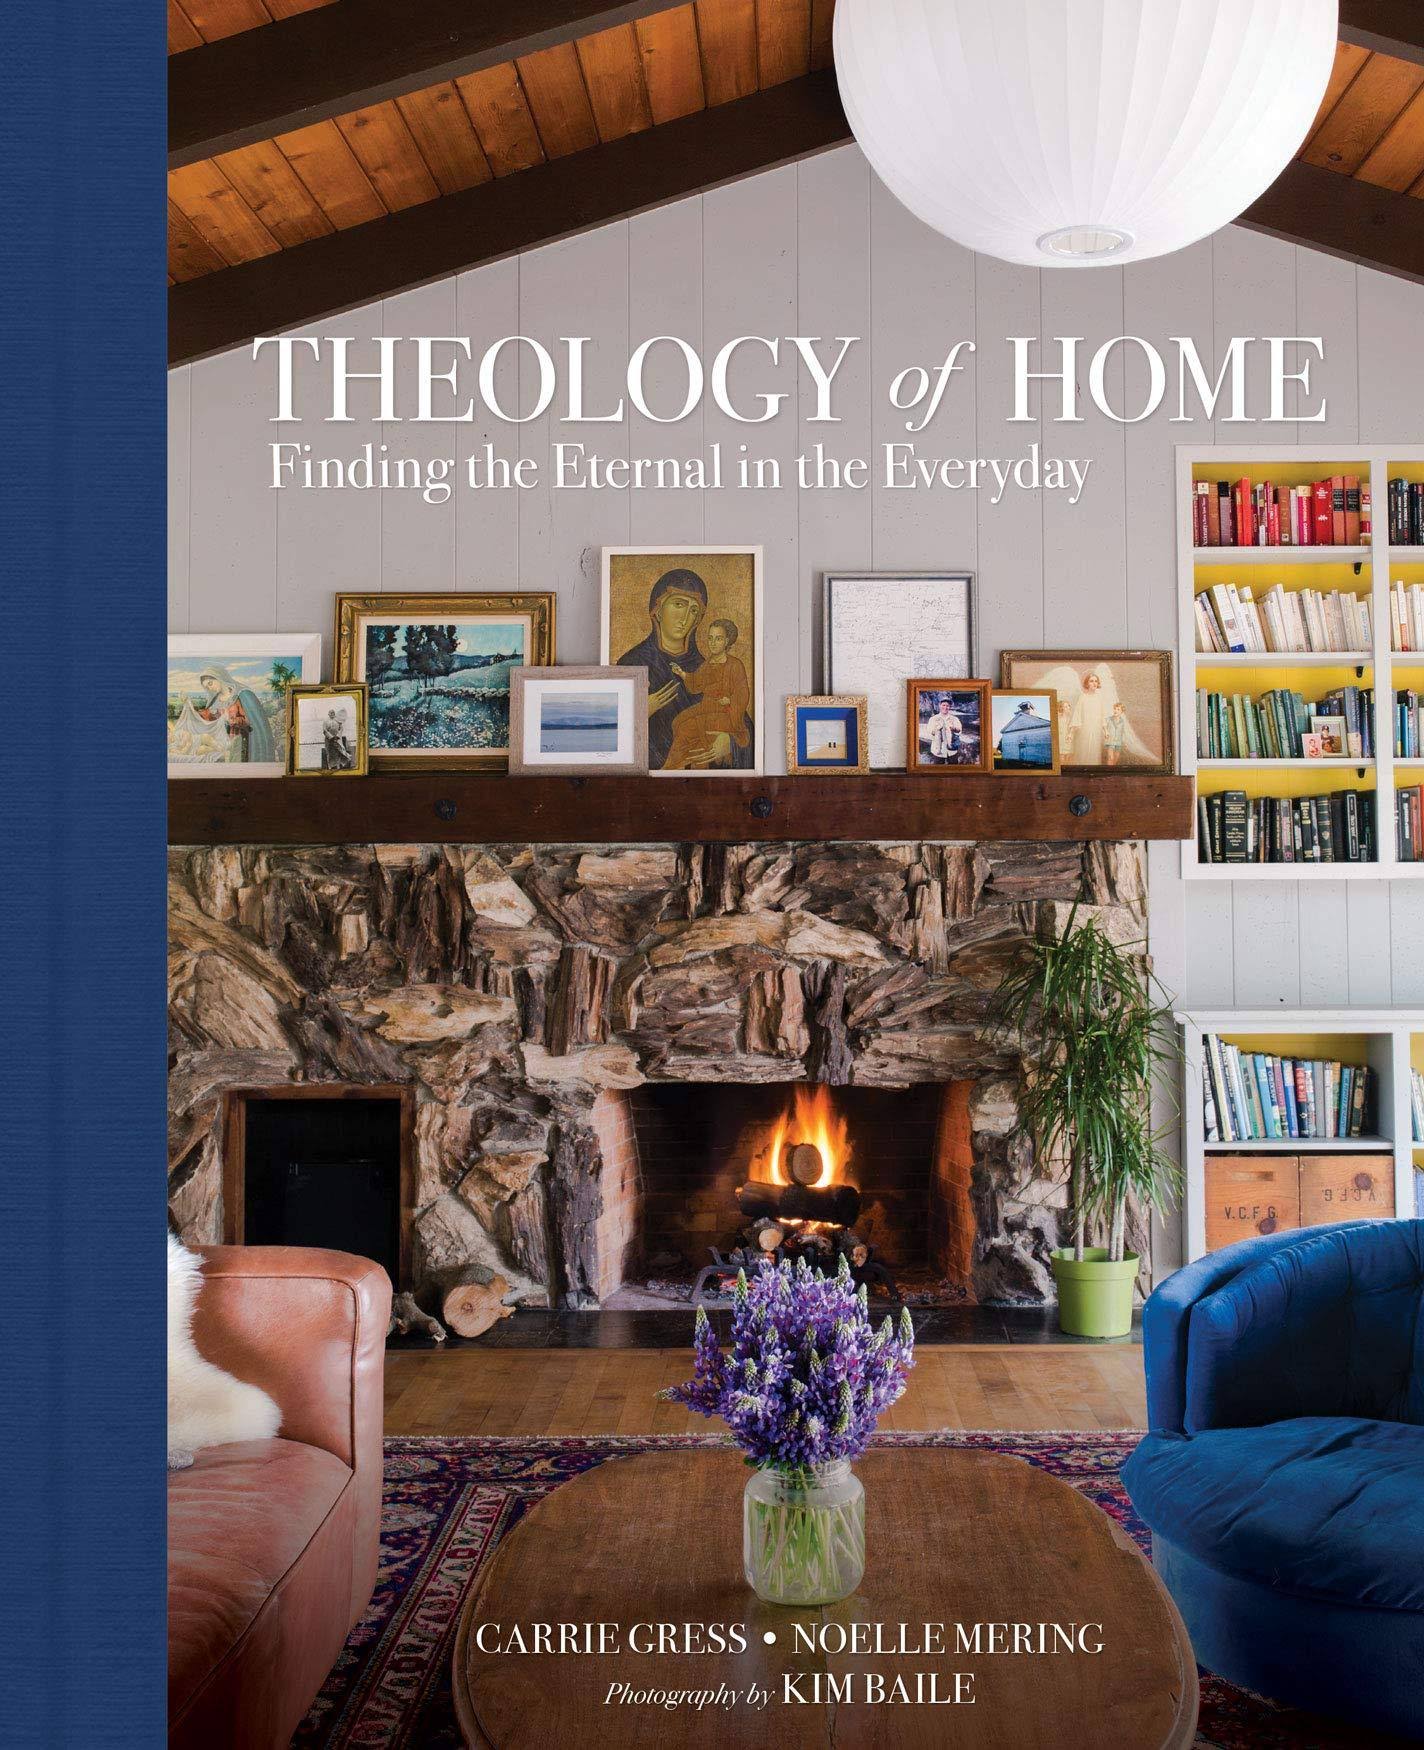 Theology of Home by Carrie Gress